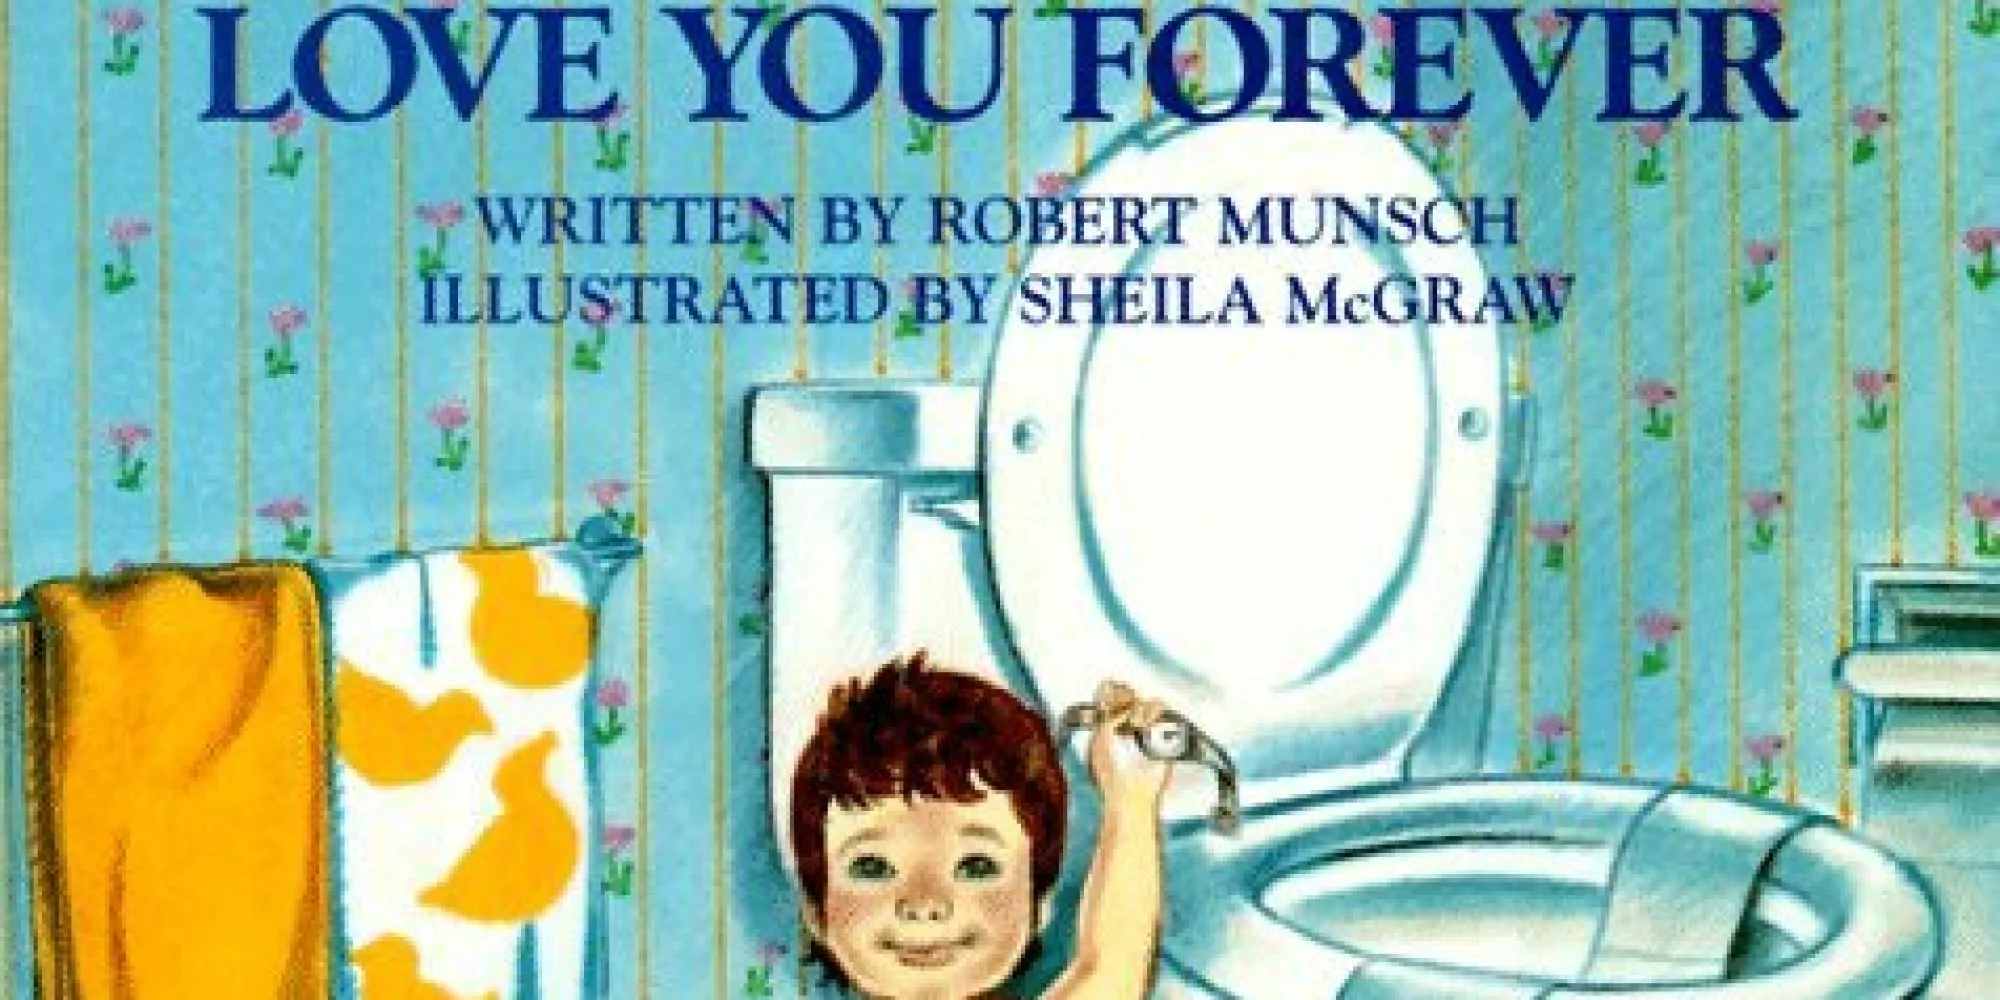 love you forever book images